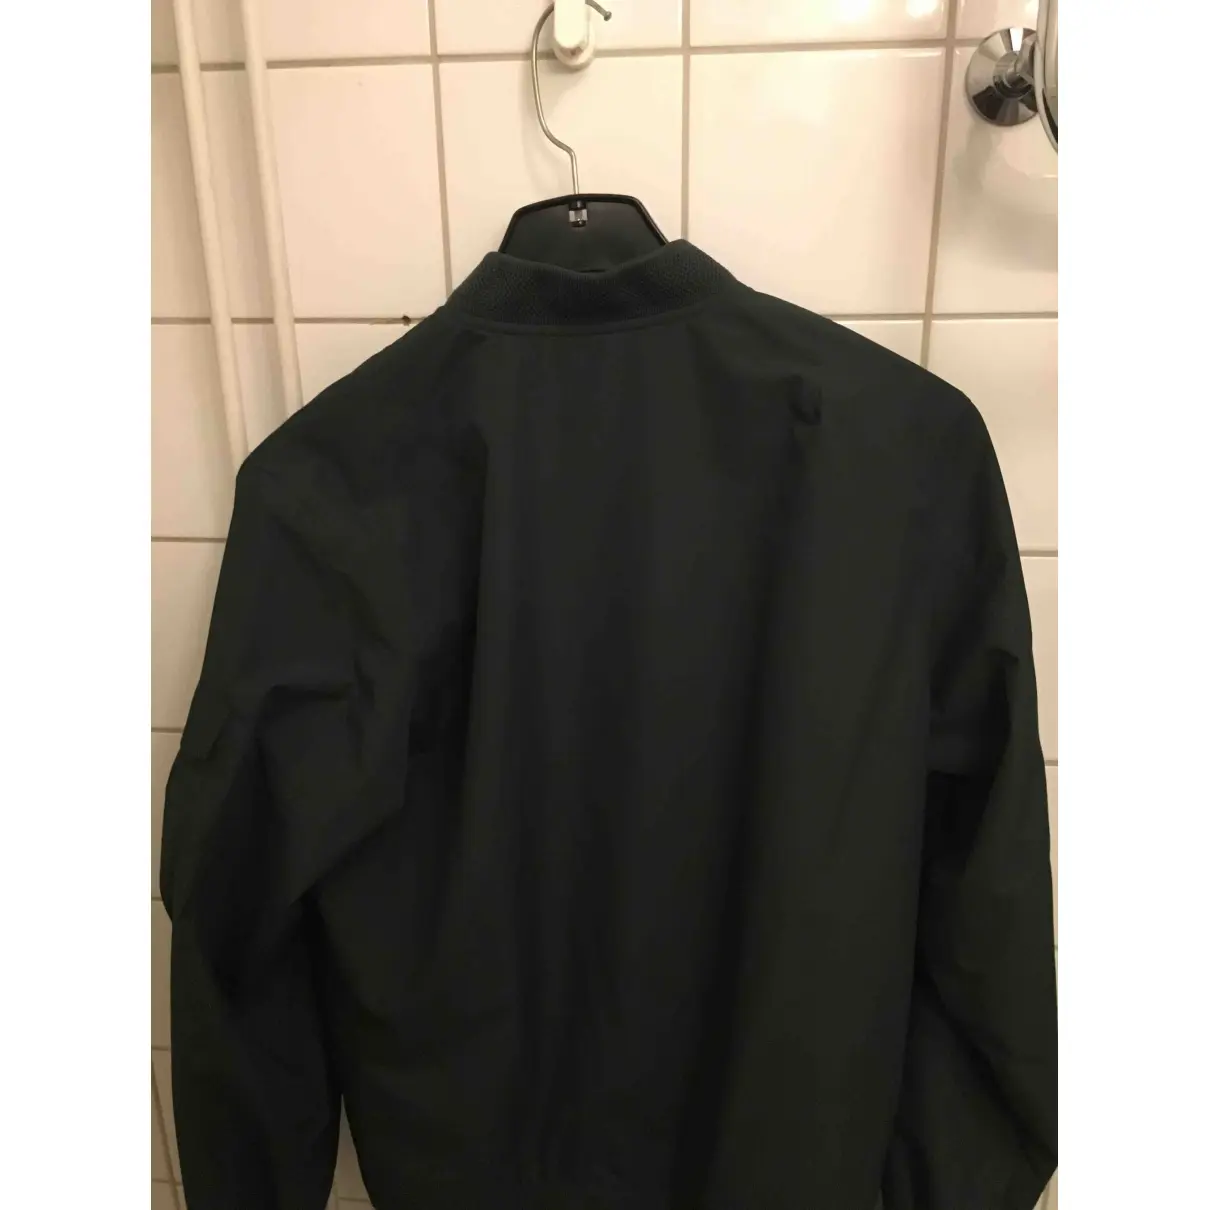 Lacoste Jacket for sale